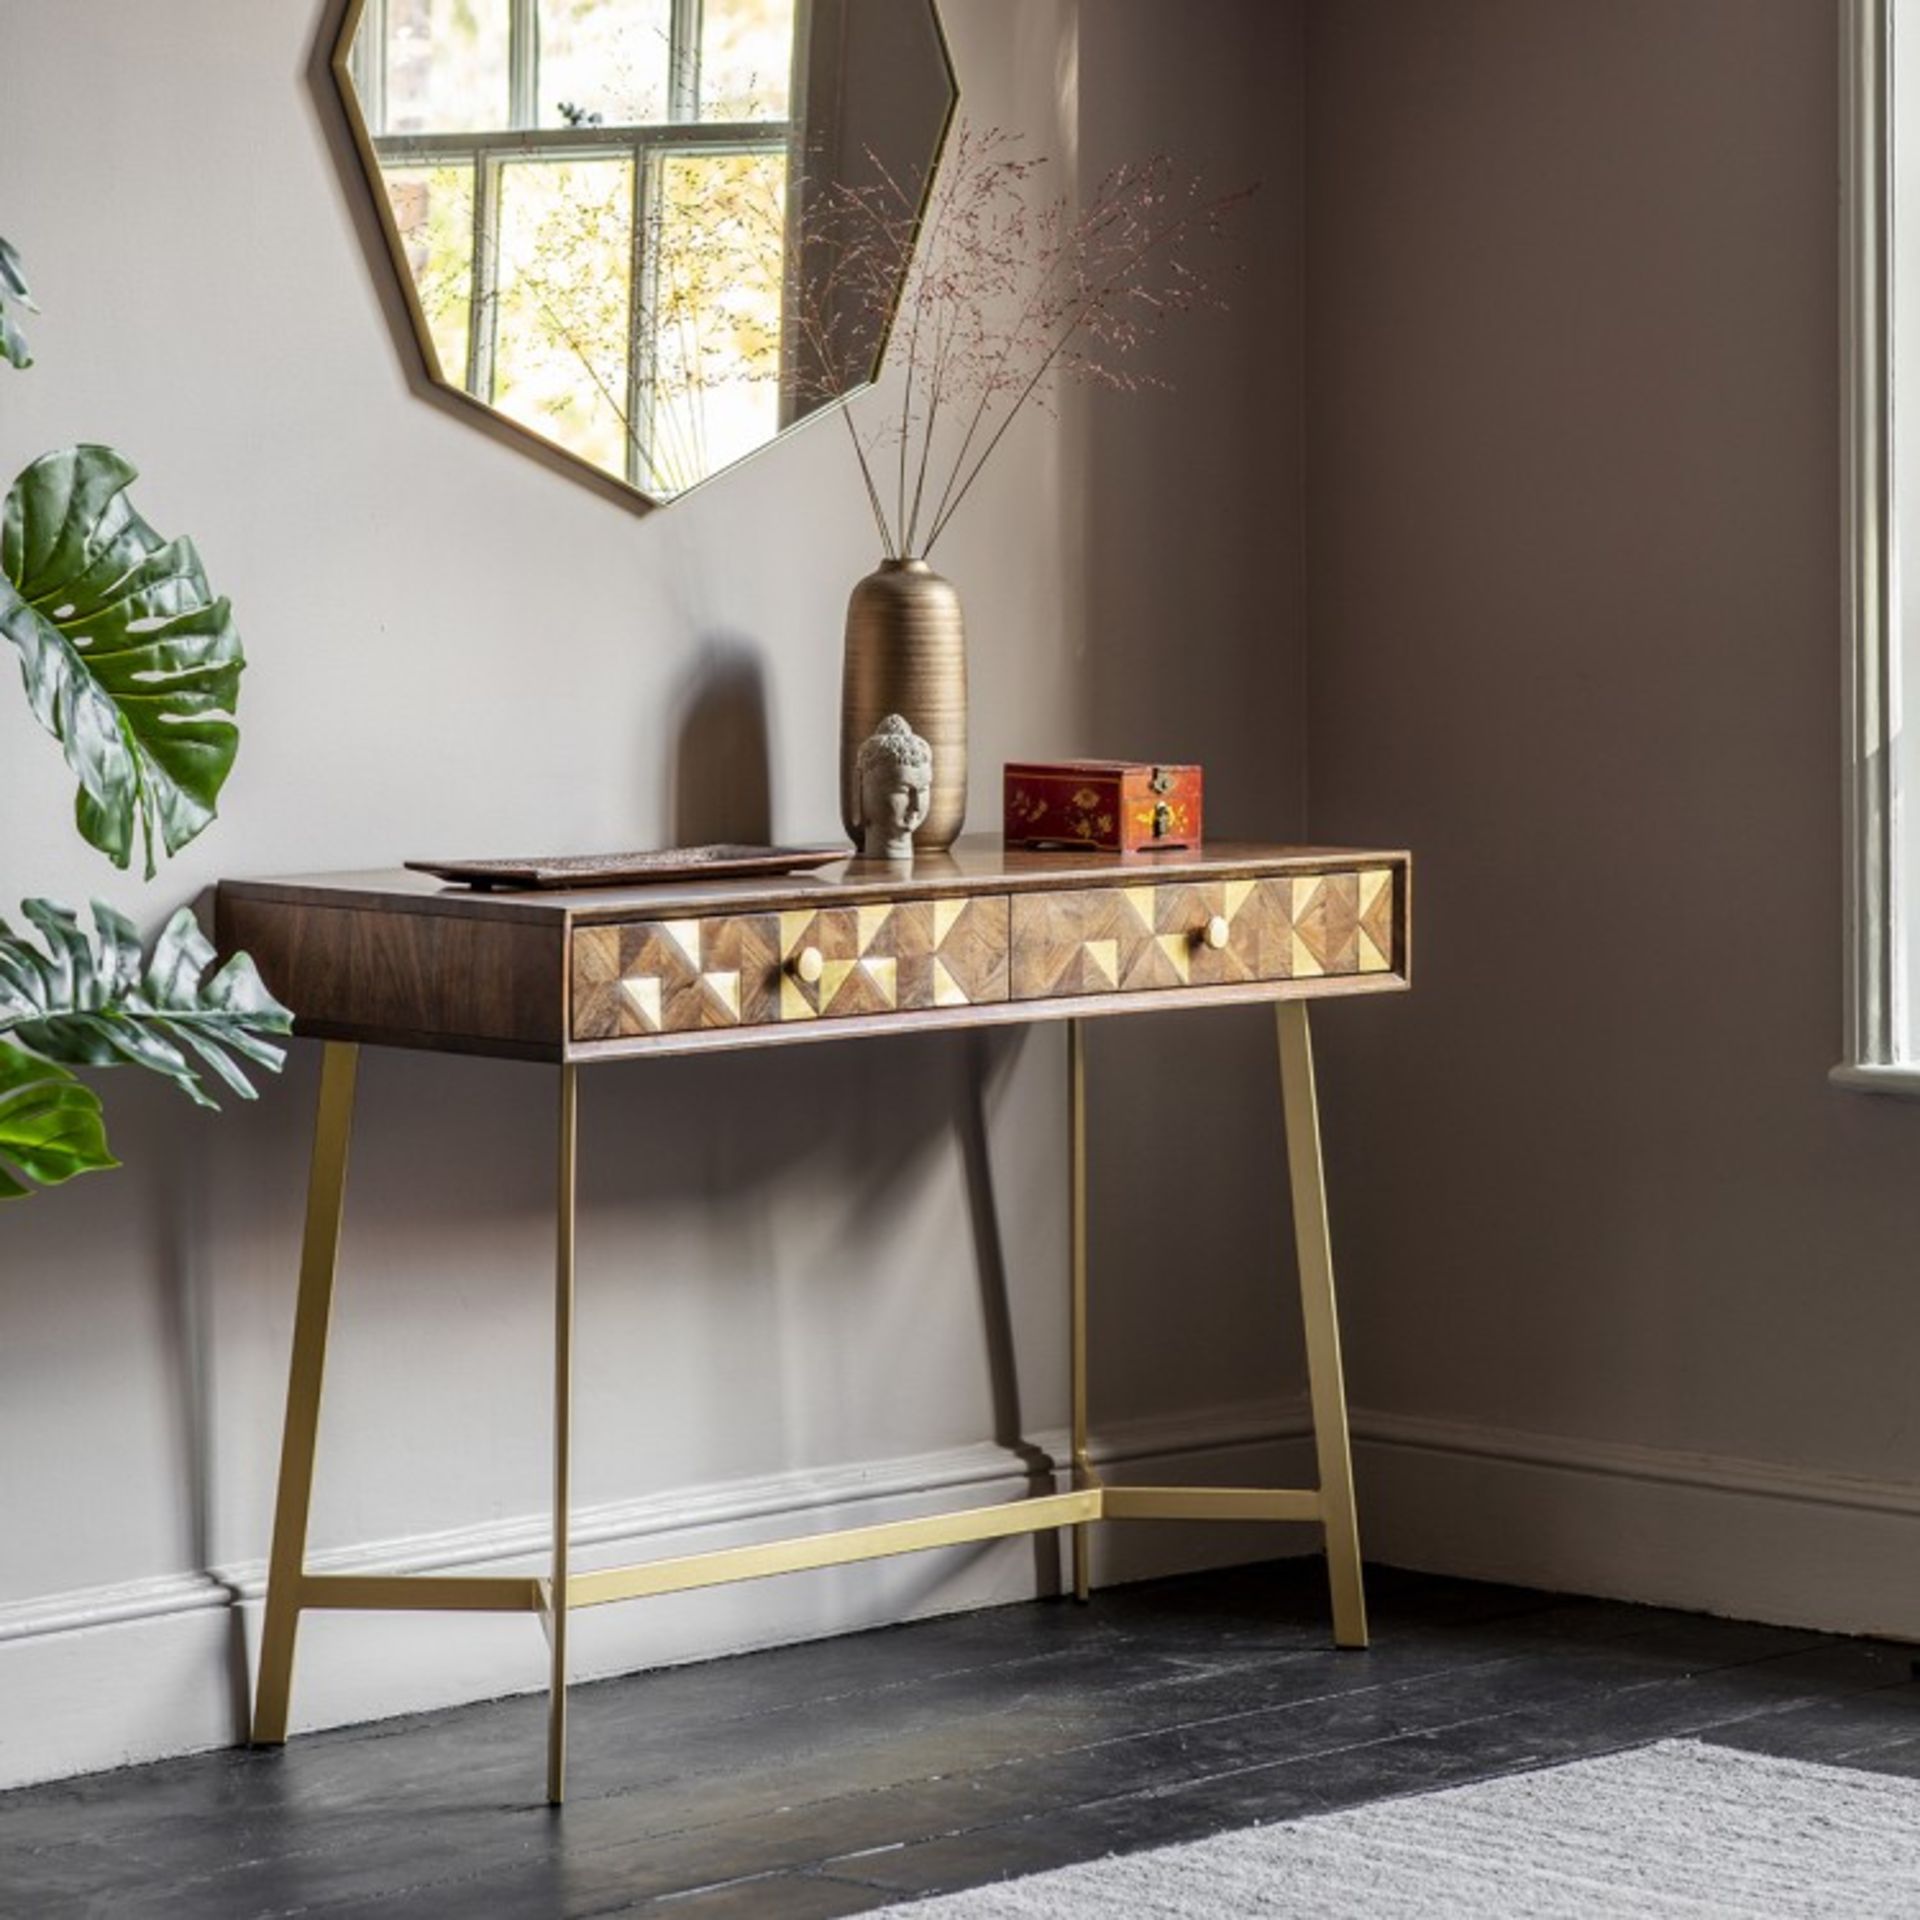 Tate Console Table This piece is a Desk /console - its designed to cover both aspects with two